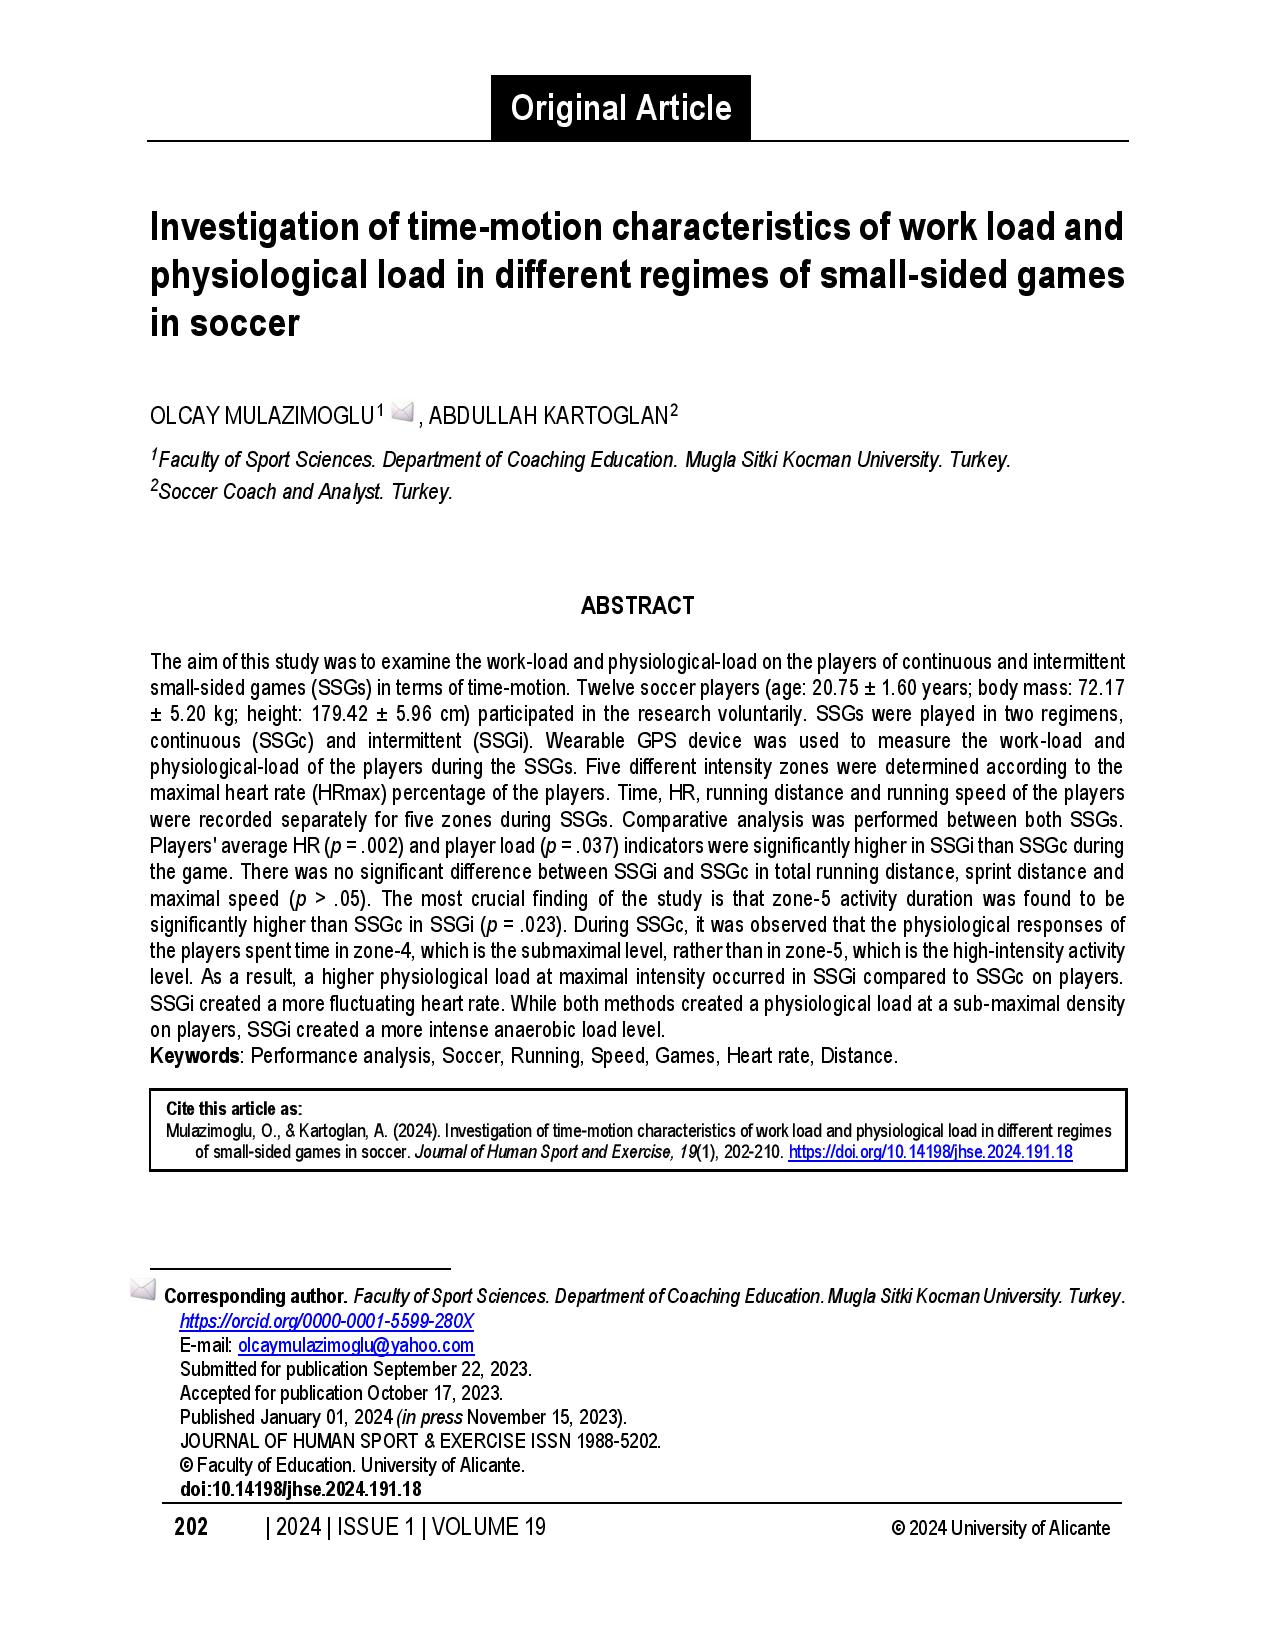 Investigation of time-motion characteristics of work load and physiological load in different regimes of small-sided games in soccer